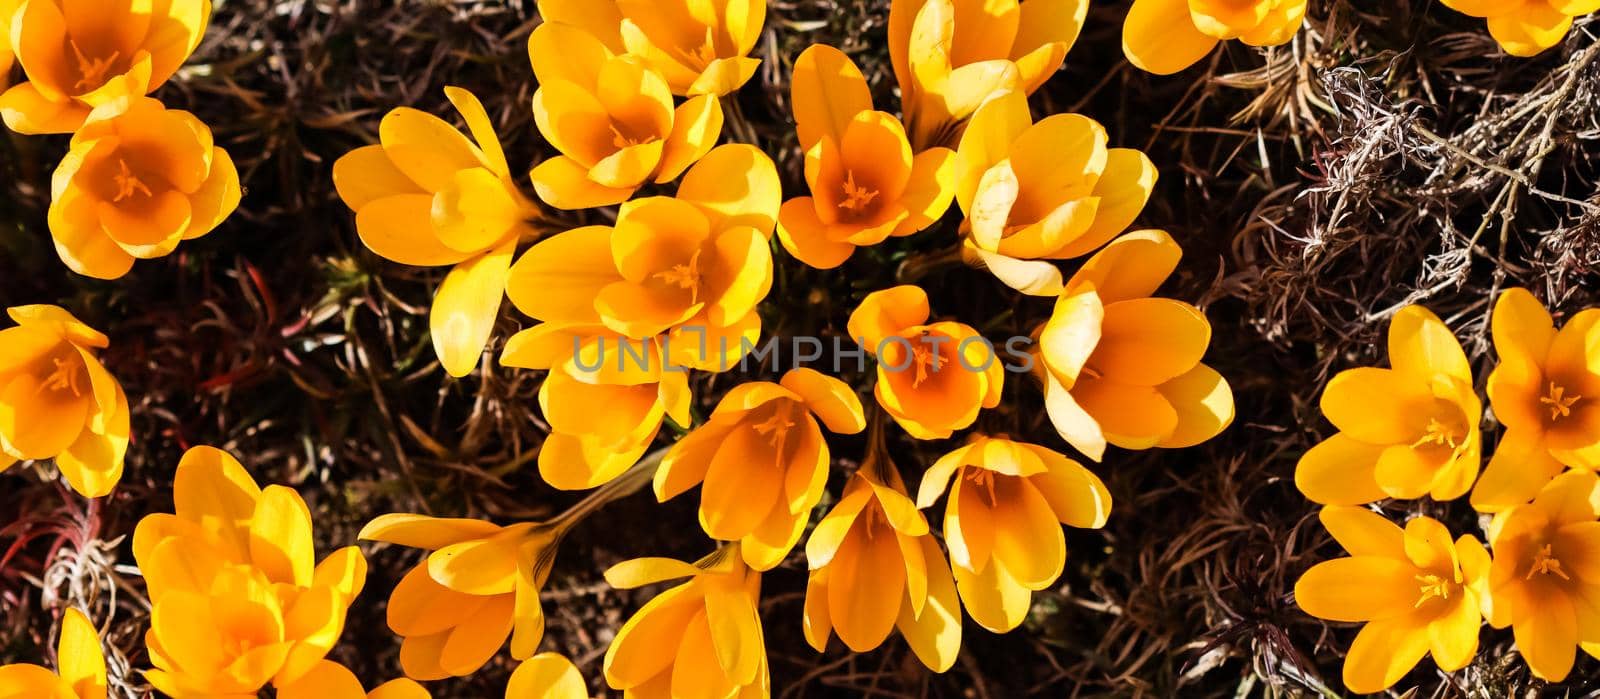 Spring in the garden. Blooming yellow crocus flowers on sunny day by Olayola